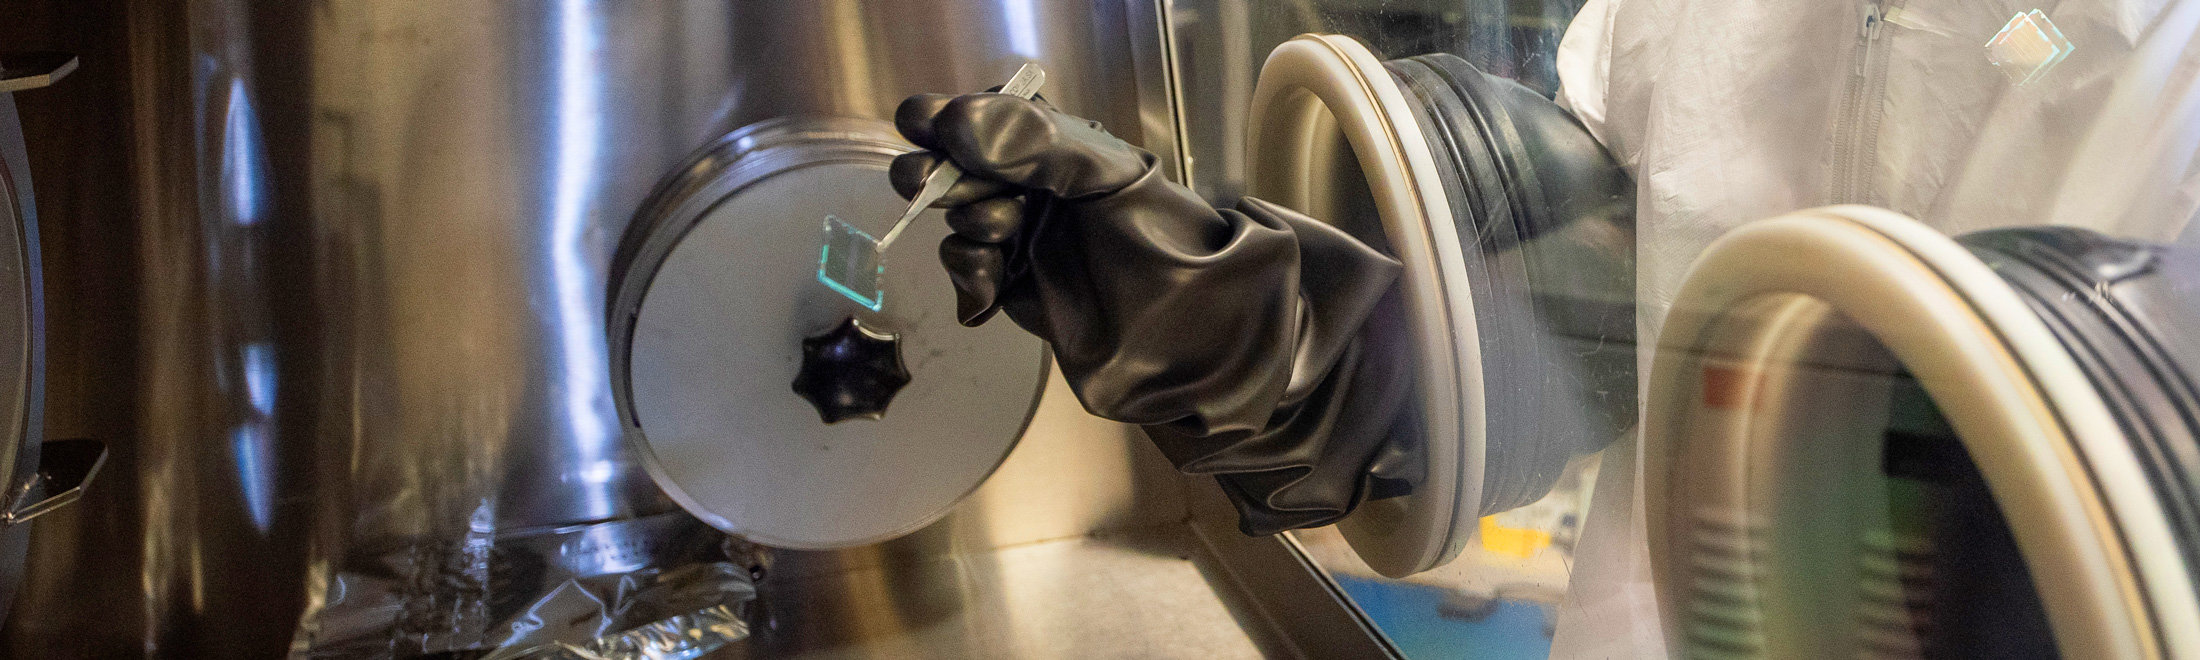 A gloved hand uses utensils to handle the photonics structure